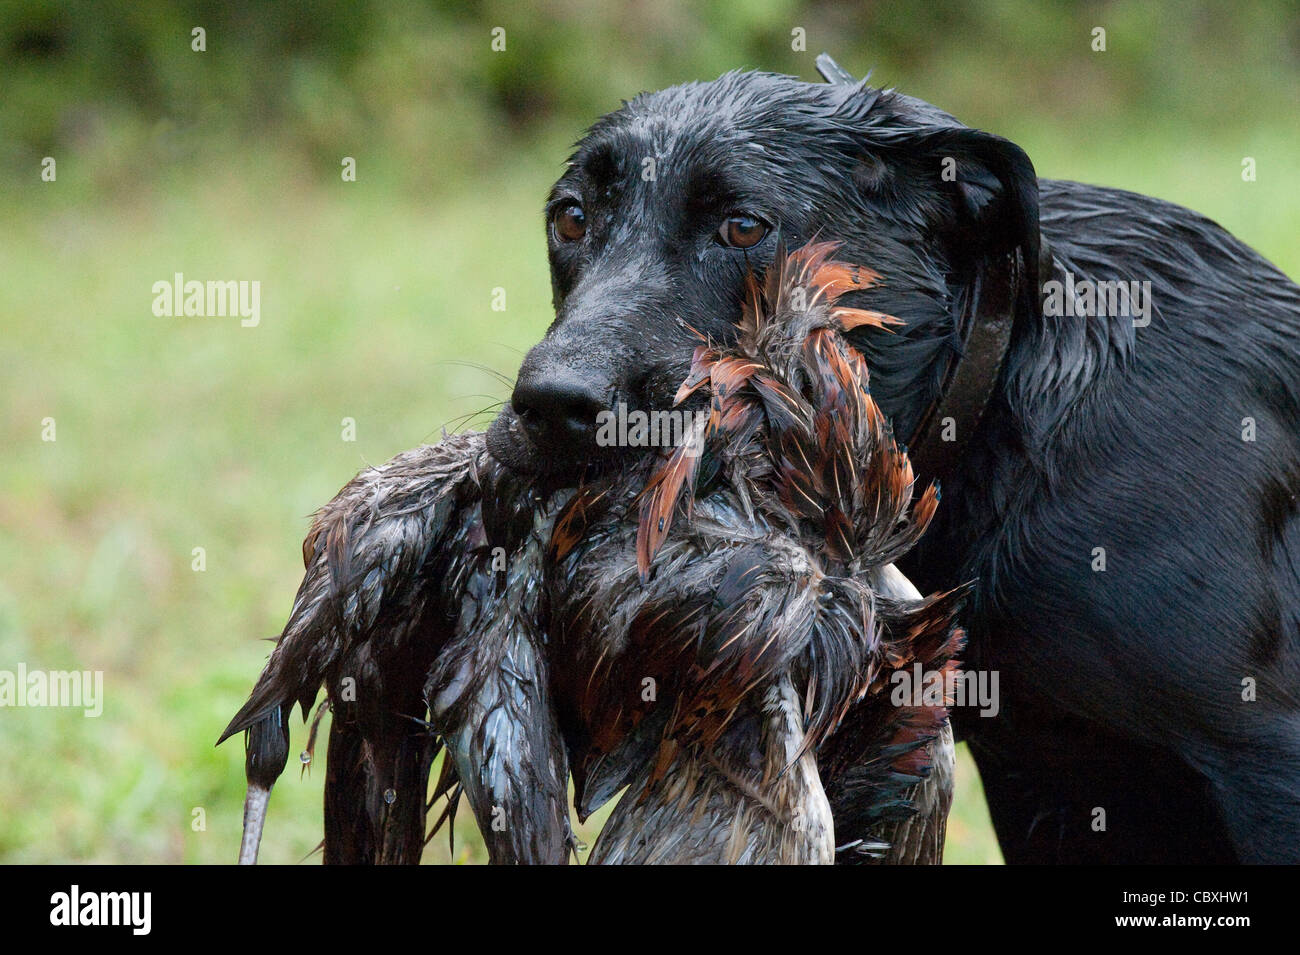 A wet Black Labrador Retriever with a pheasant in its mouth. Stock Photo